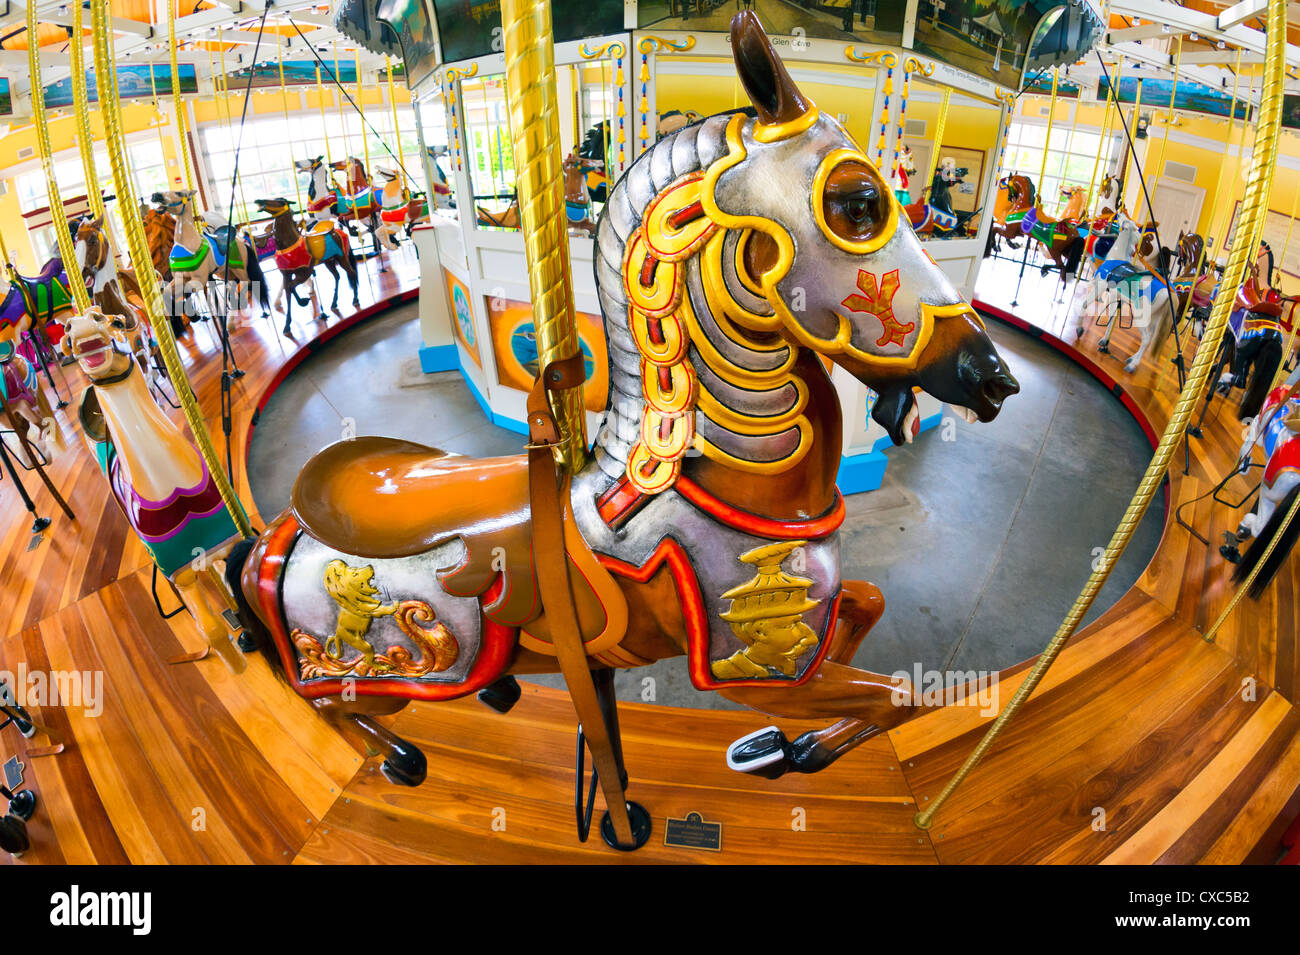 Historic Nunley's Carousel, with horse wearing armor seen from above, 180 degree fisheye view, Long Island, New York USA 2012 Stock Photo